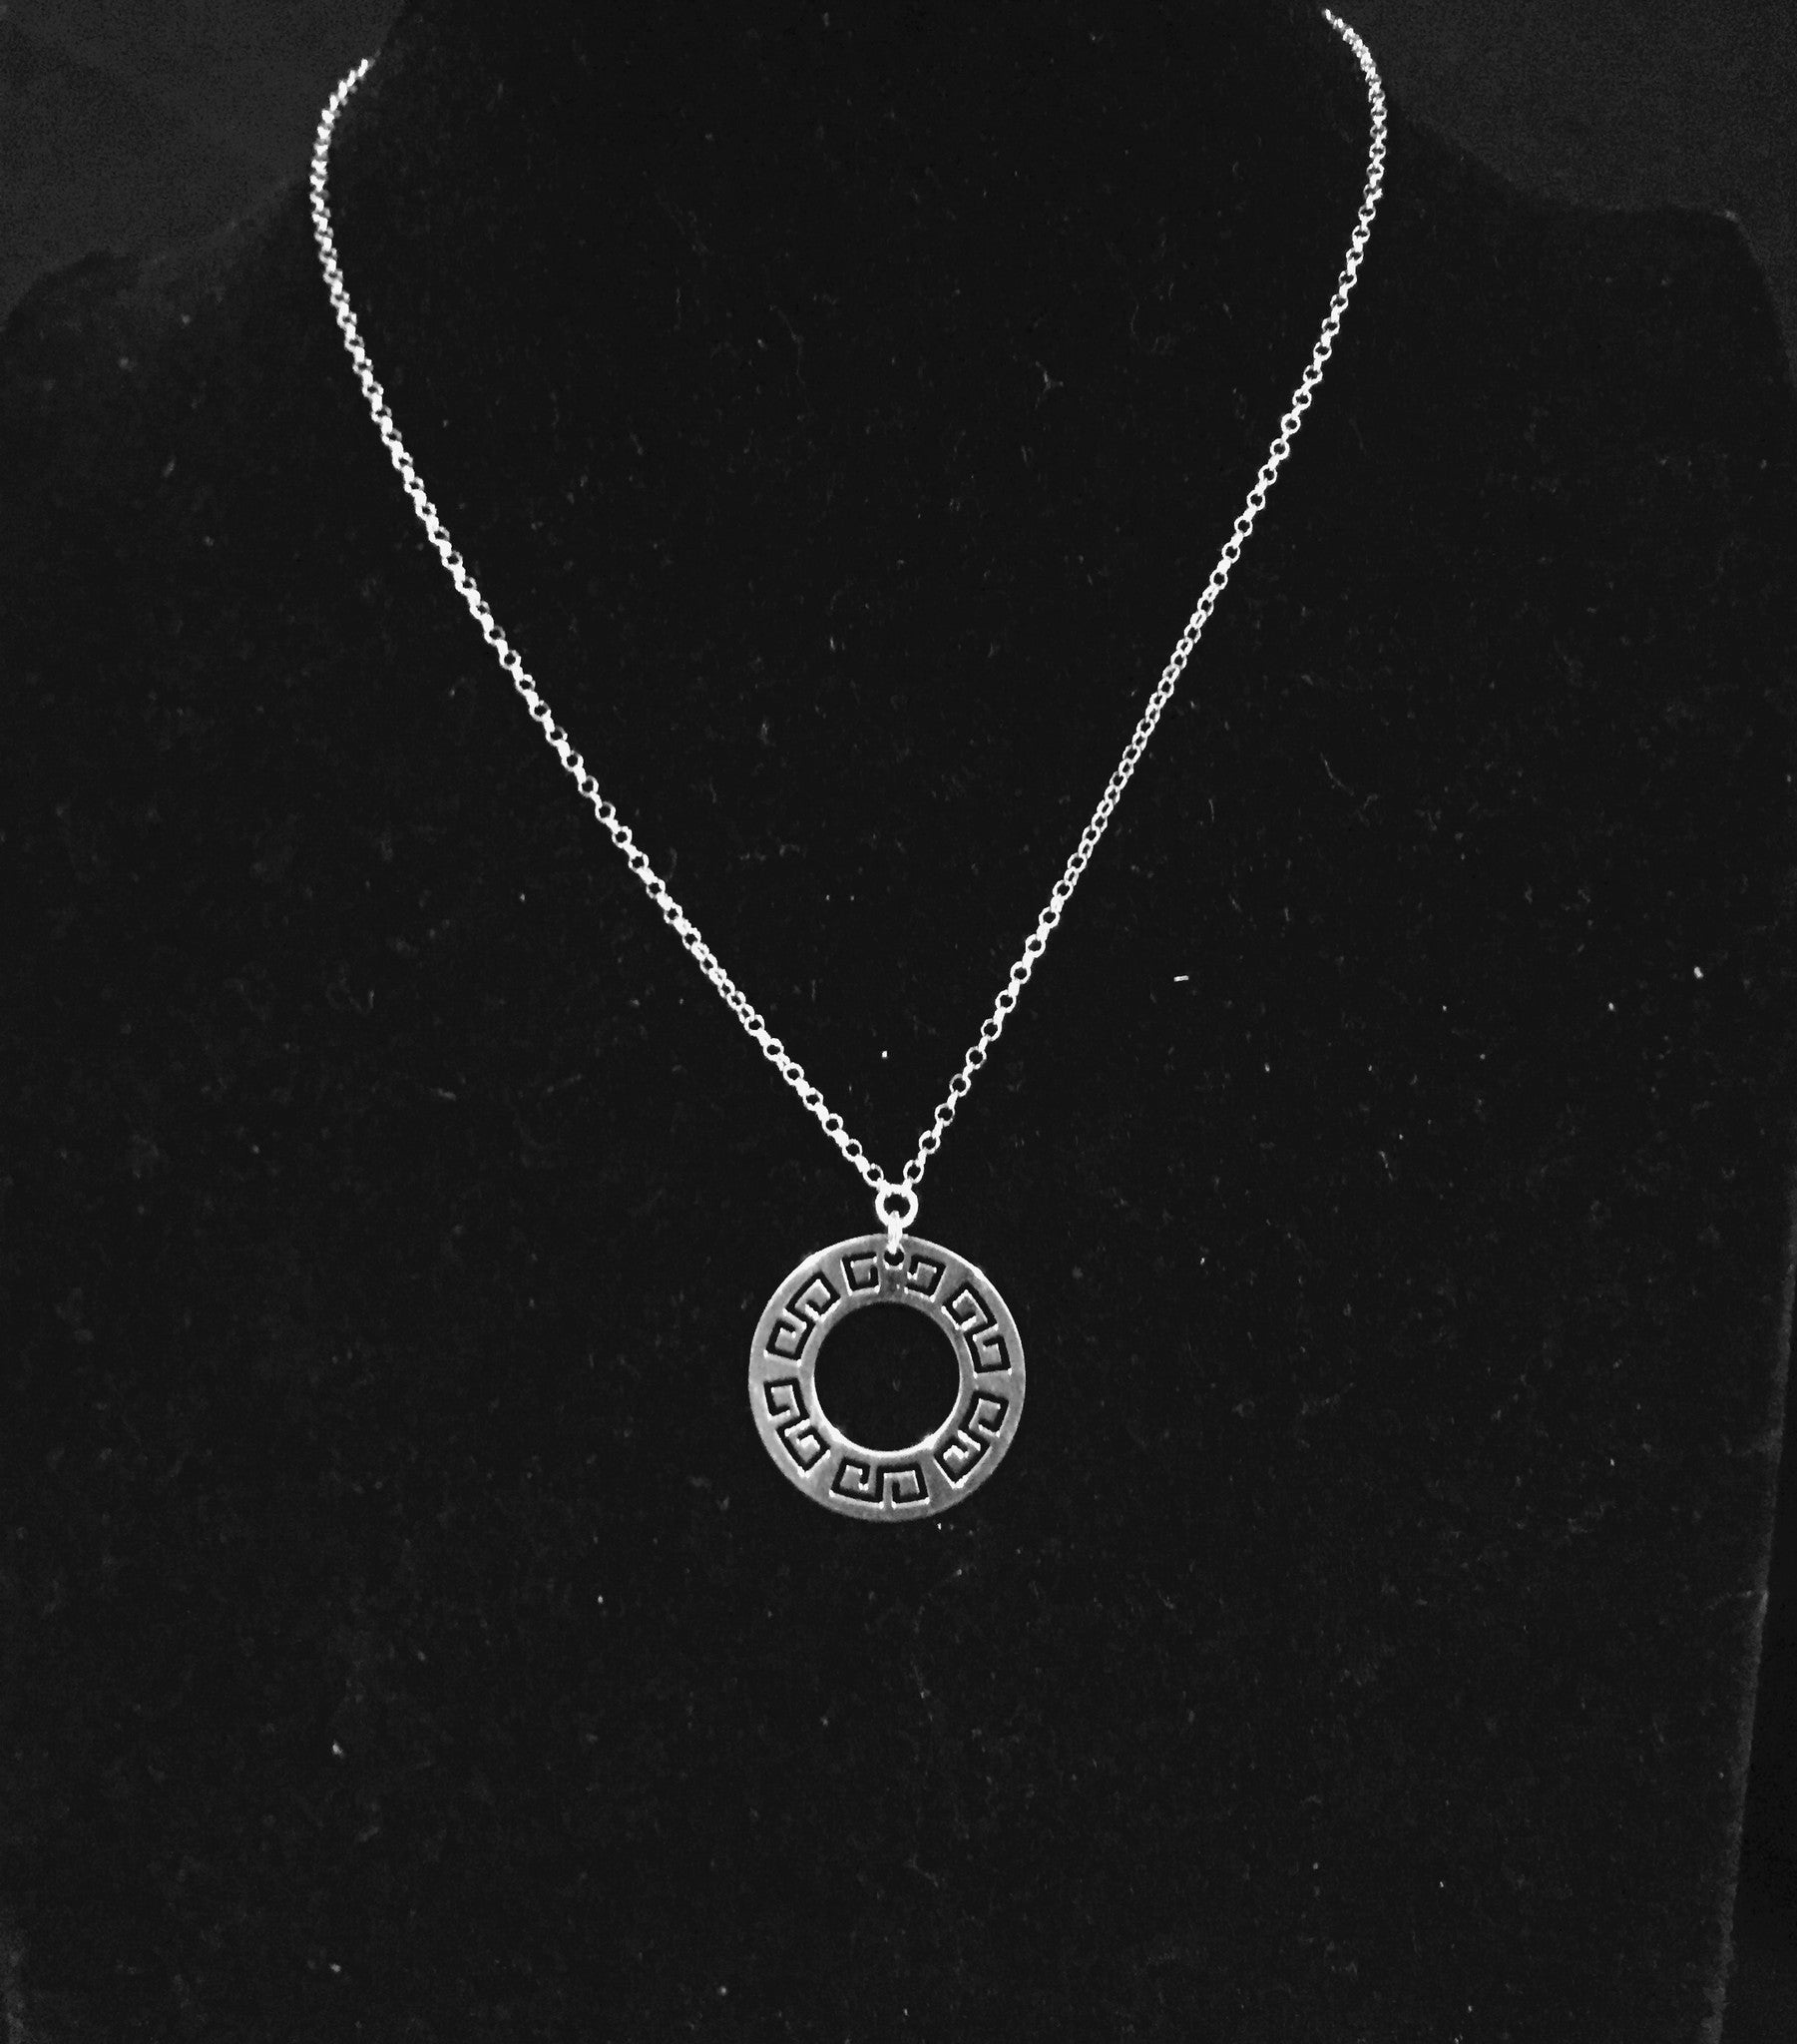 Last One!  Genuine Silver Egyptian design pendant and Chain - FashionFunPop, Trendy, fashion, plus, skinny, fitted, ripped, dress, dresses, tops, blazers, women, clothing, bathing suits, swimwear, vacation, stylish, jewelry, accessories, handbags, shoes, boutique, shopping, store, clutch, clutches, handbag, blouses, mom, mommy, tee, tees, jeans,   pants, maxi, maxies, rompers, jumpers, sexy, clearance, new, sales, mika rose, she and sky, &, blvd, in style, esley, gilli, blu pepper, earrings, bracelets, bang